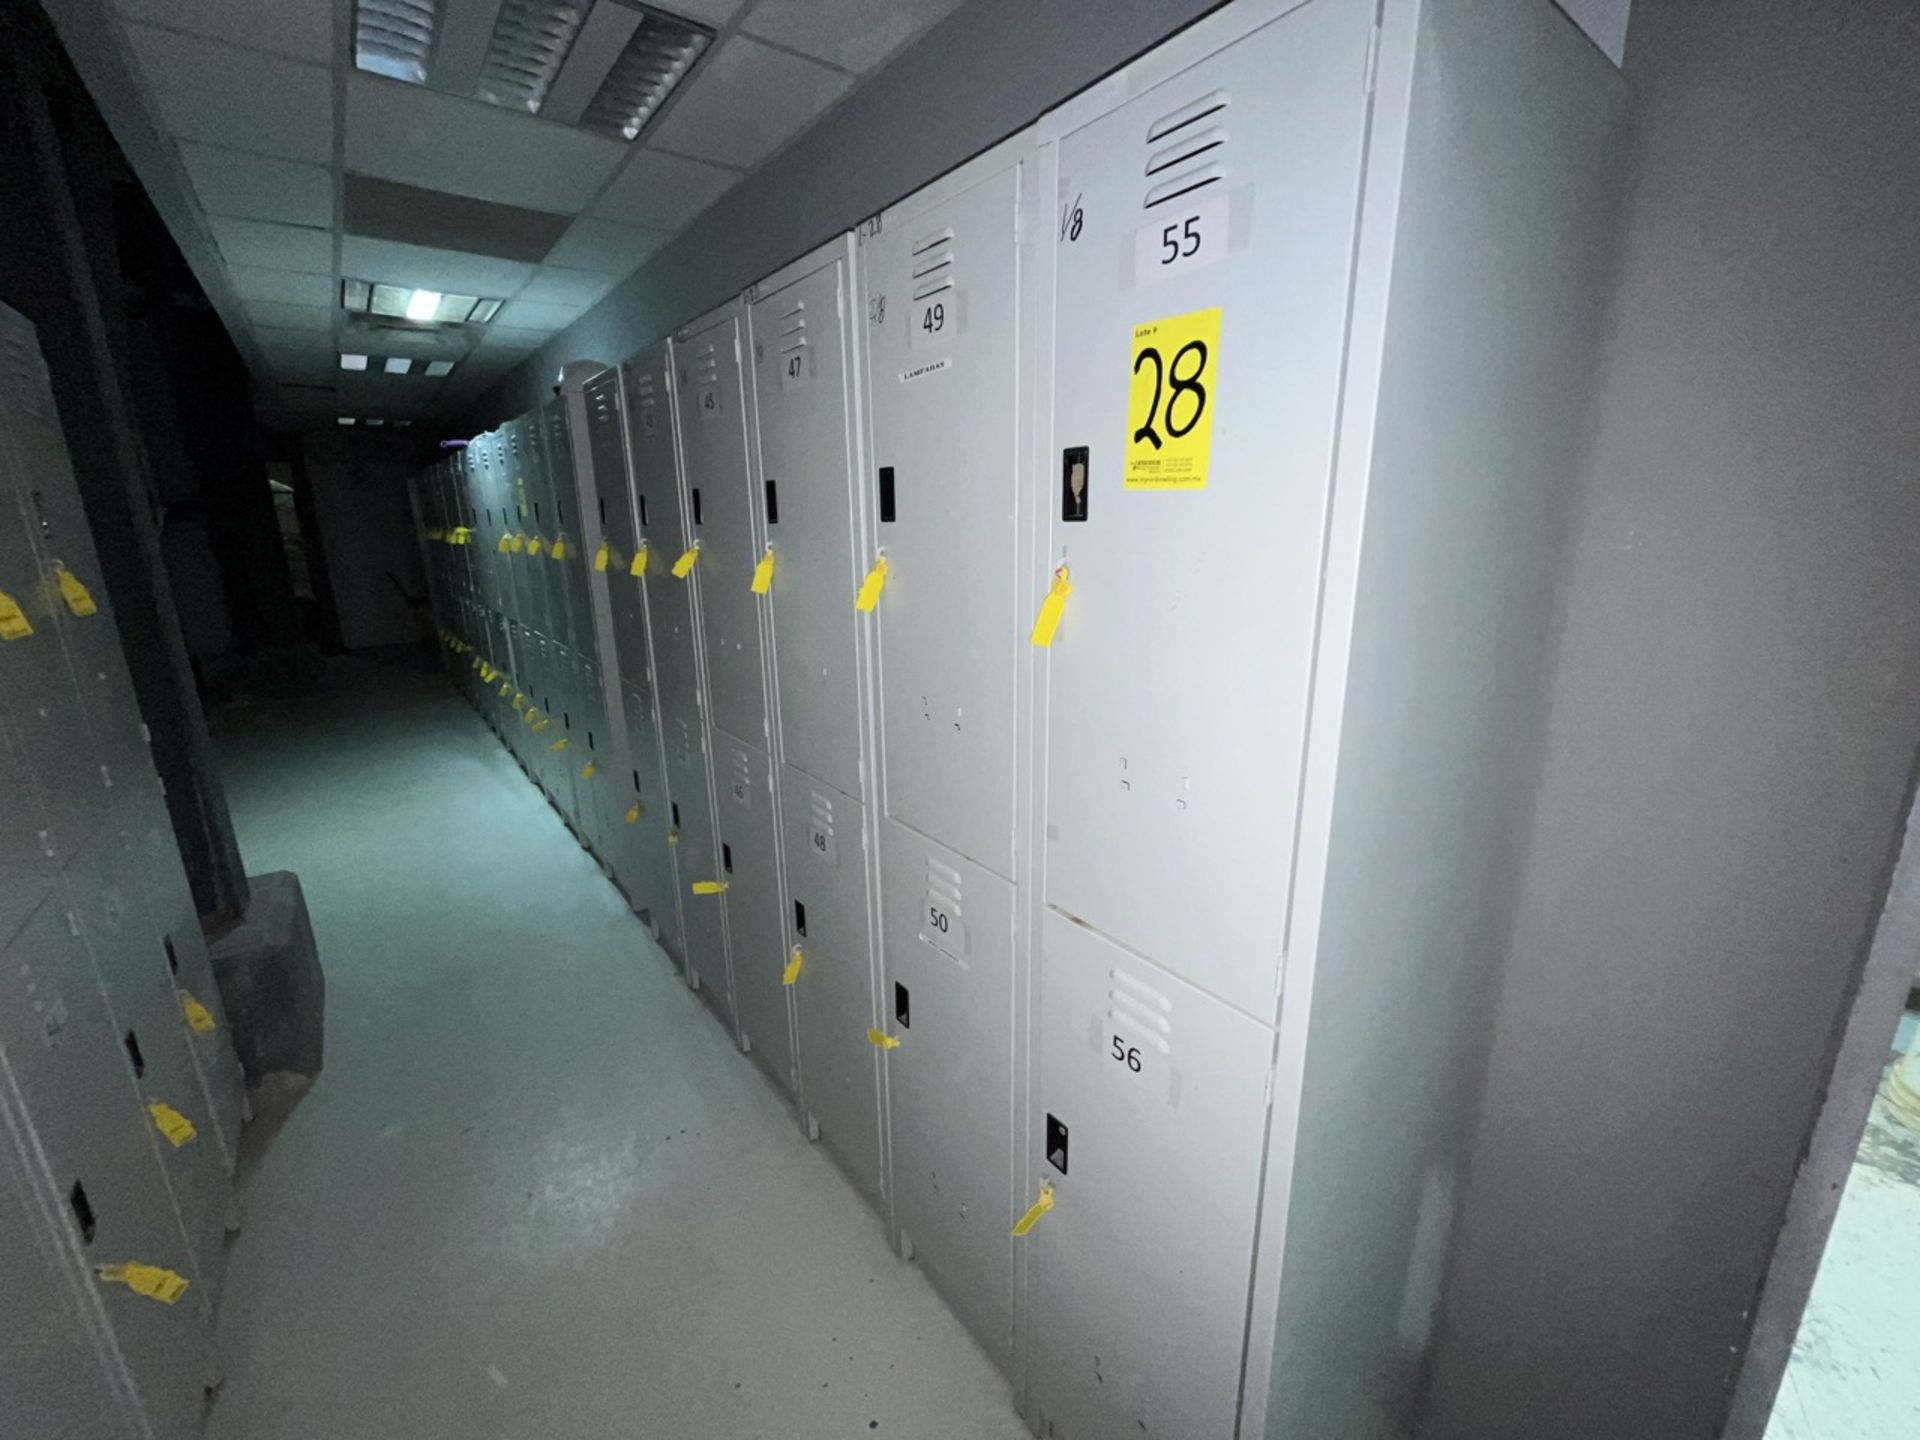 Lot of 8 storage lockers of 2 spaces each, measuring approximately 0.40 x 0.40 x 1.80 meters. / Lo - Bild 2 aus 5